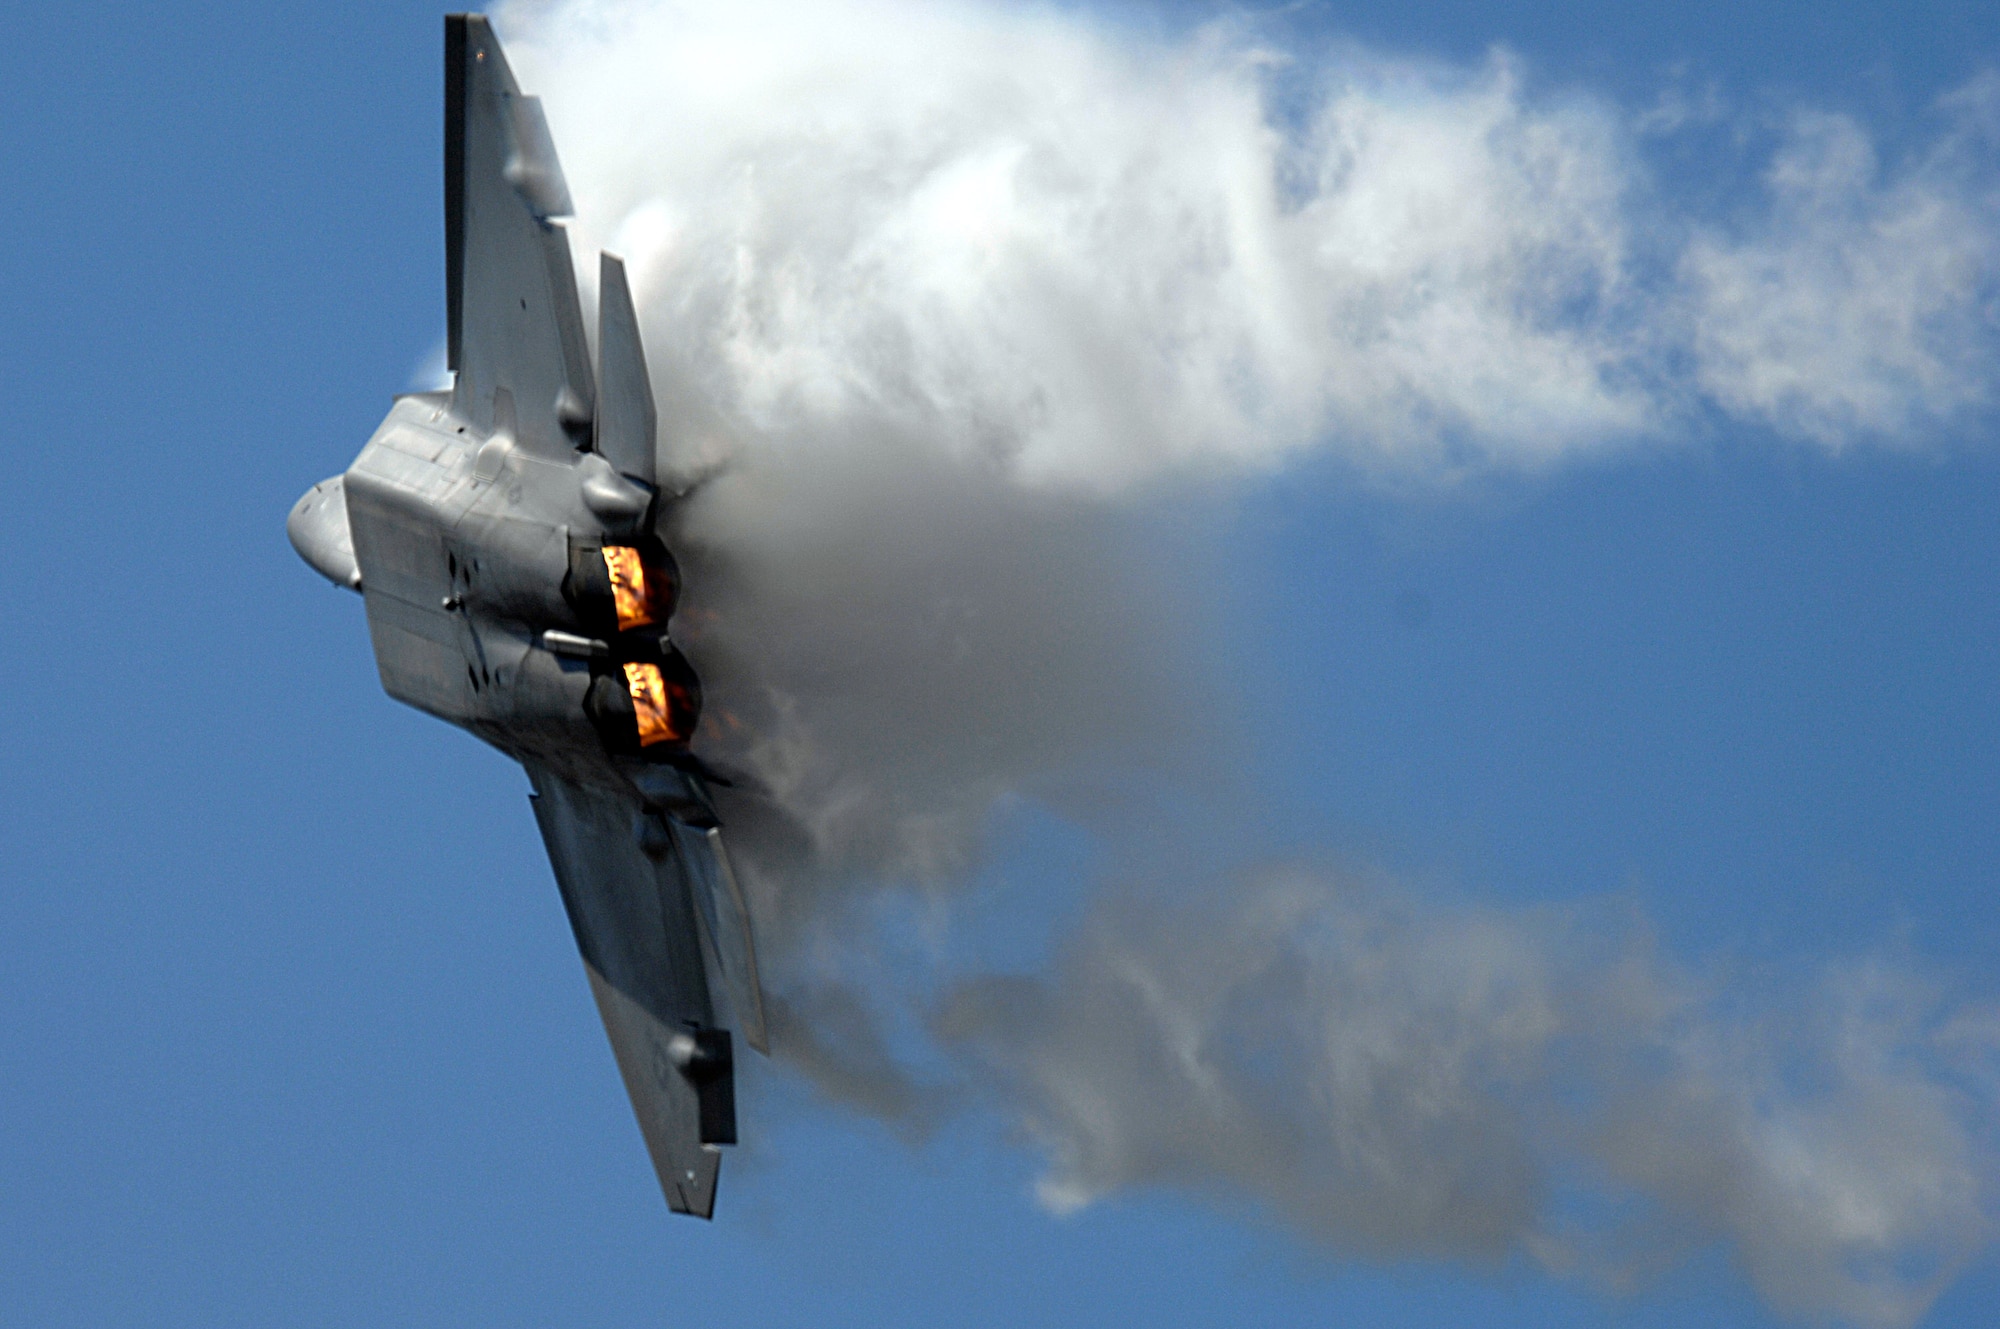 The F-22 Raptor performs for thousands during an April 1 air show at Naval Base Ventura County in Point Mugu, Calif. This F-22 is based at Langley Air Force Base, Va. The F-22 is the Air Force's newest fighter aircraft. The sophisticated F-22 aerodesign, advanced flight controls, thrust vectoring, and high thrust-to-weight ratio provide the capability to outmaneuver all current and projected aircraft. (U.S. Air Force photo/Tech Sgt Justin D. Pyle) 
